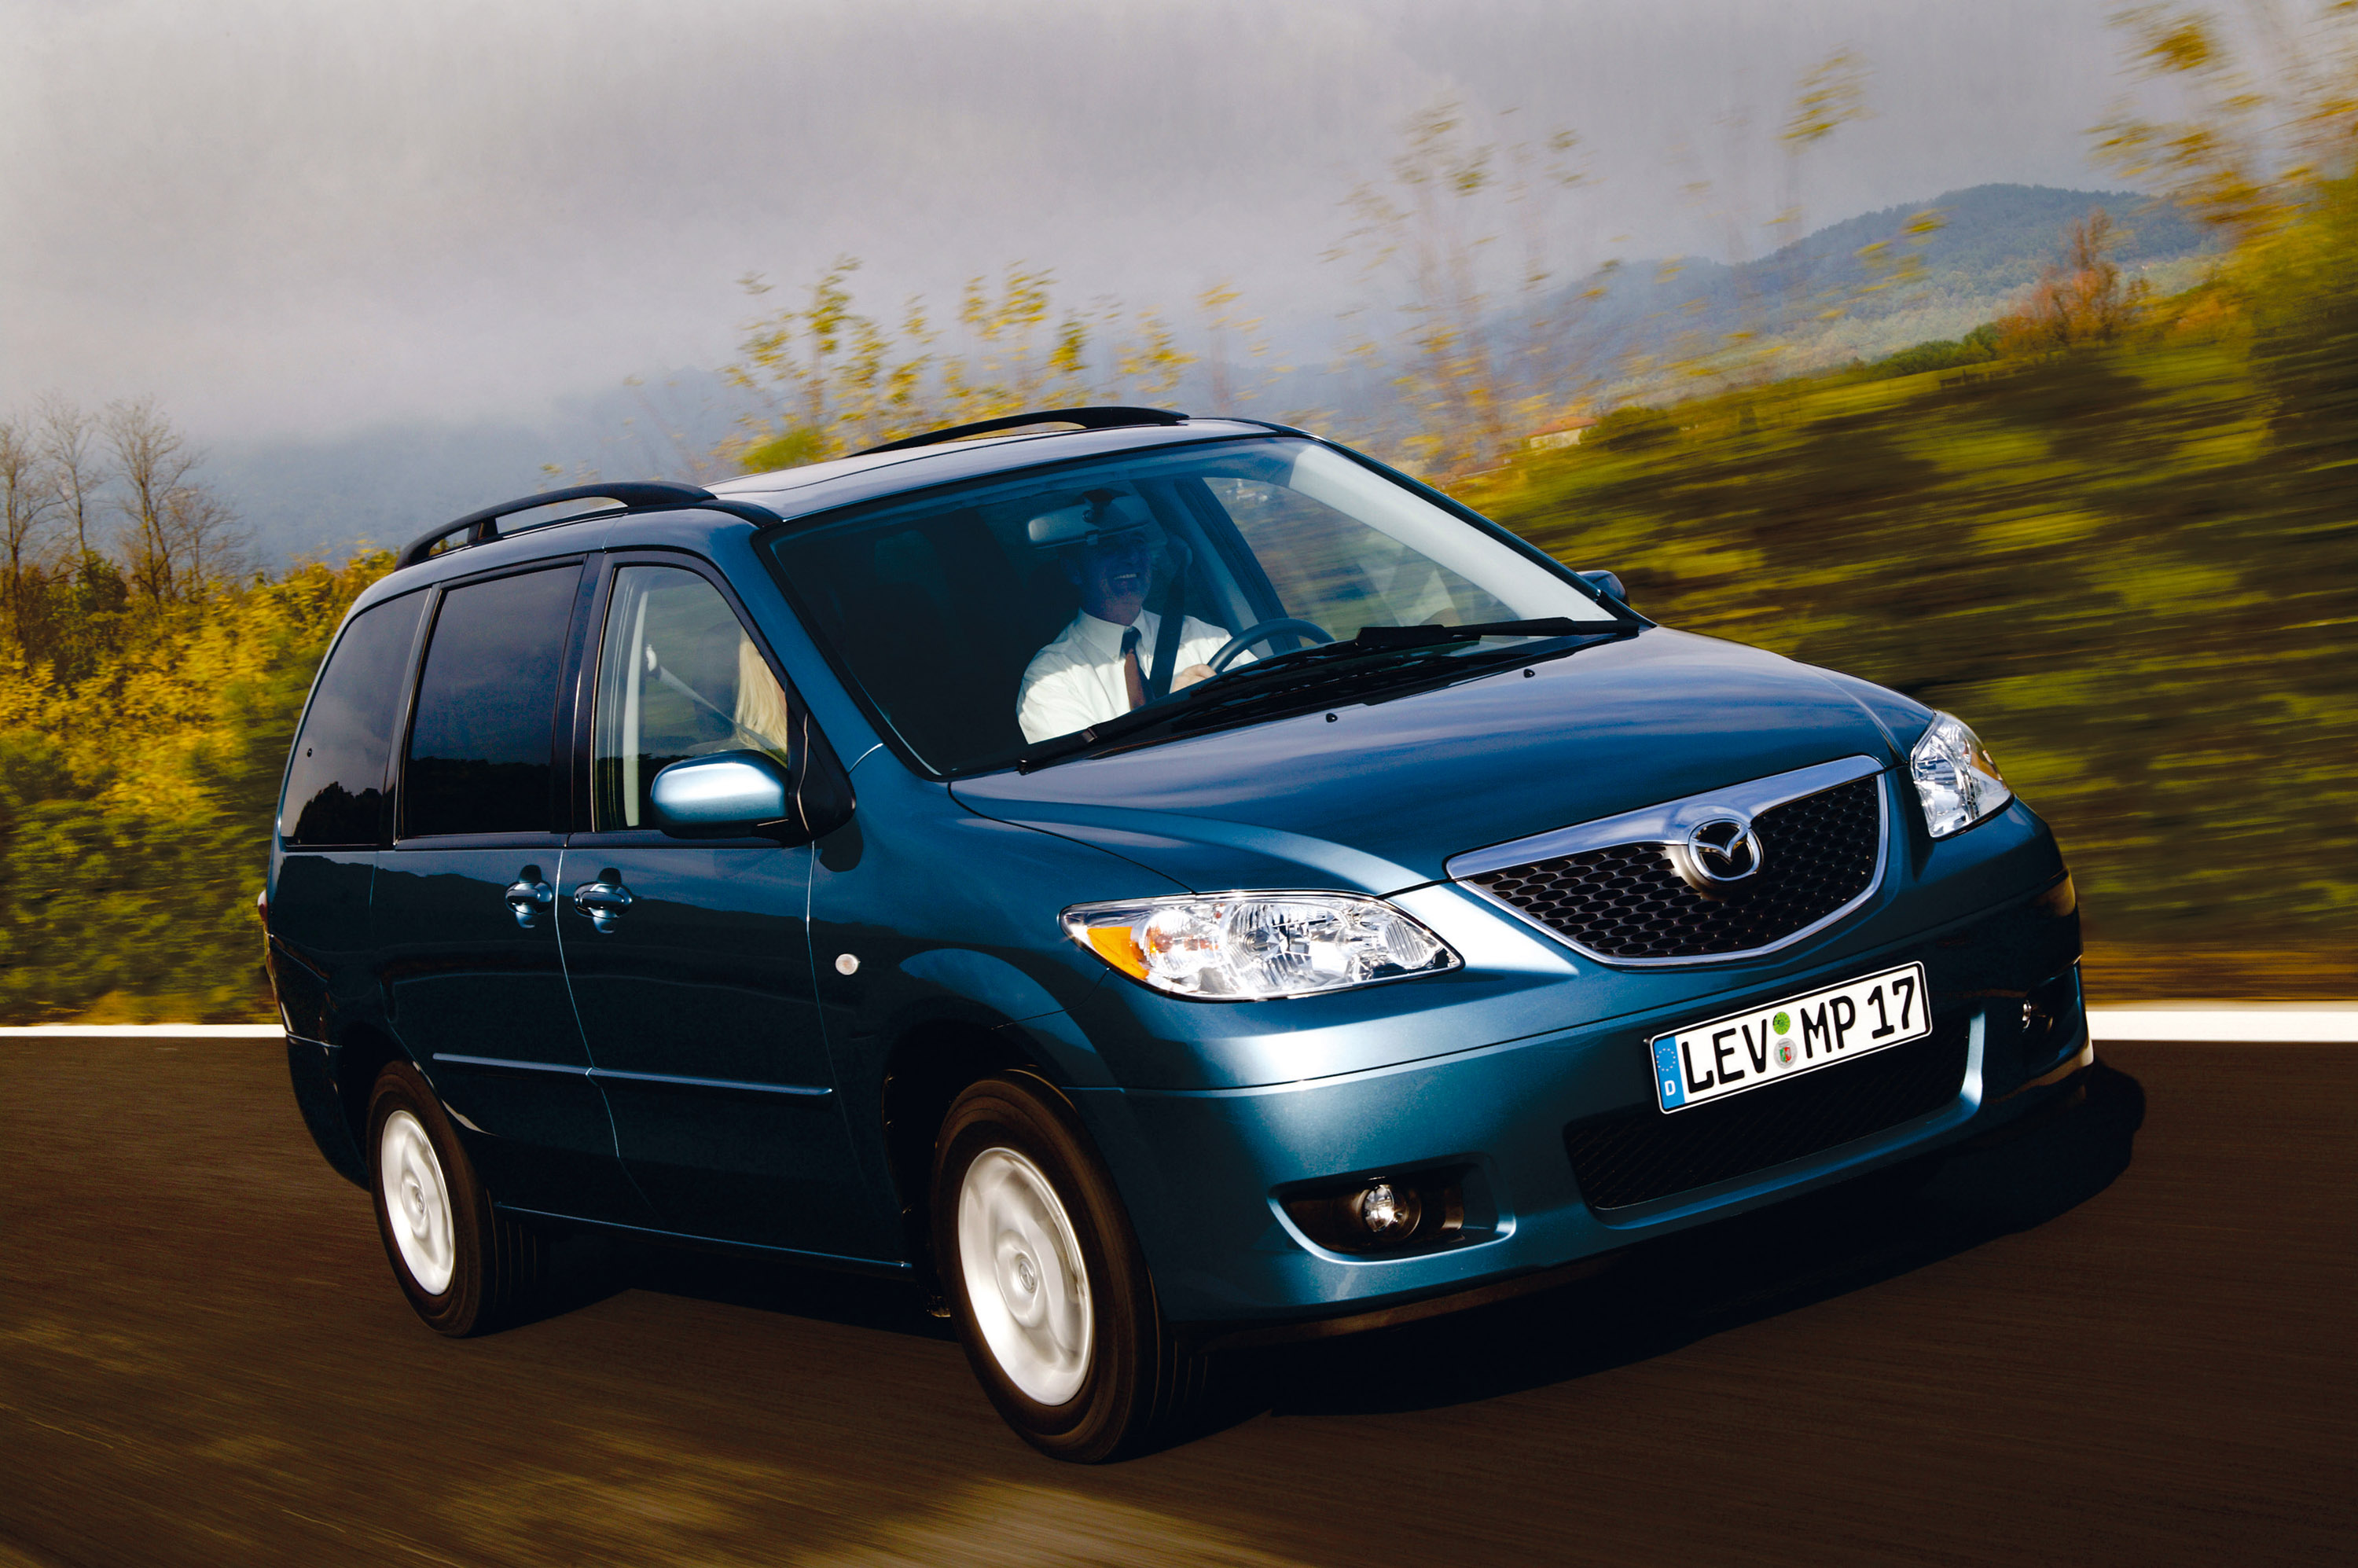 2004 Mazda MPV Facelift HD Pictures